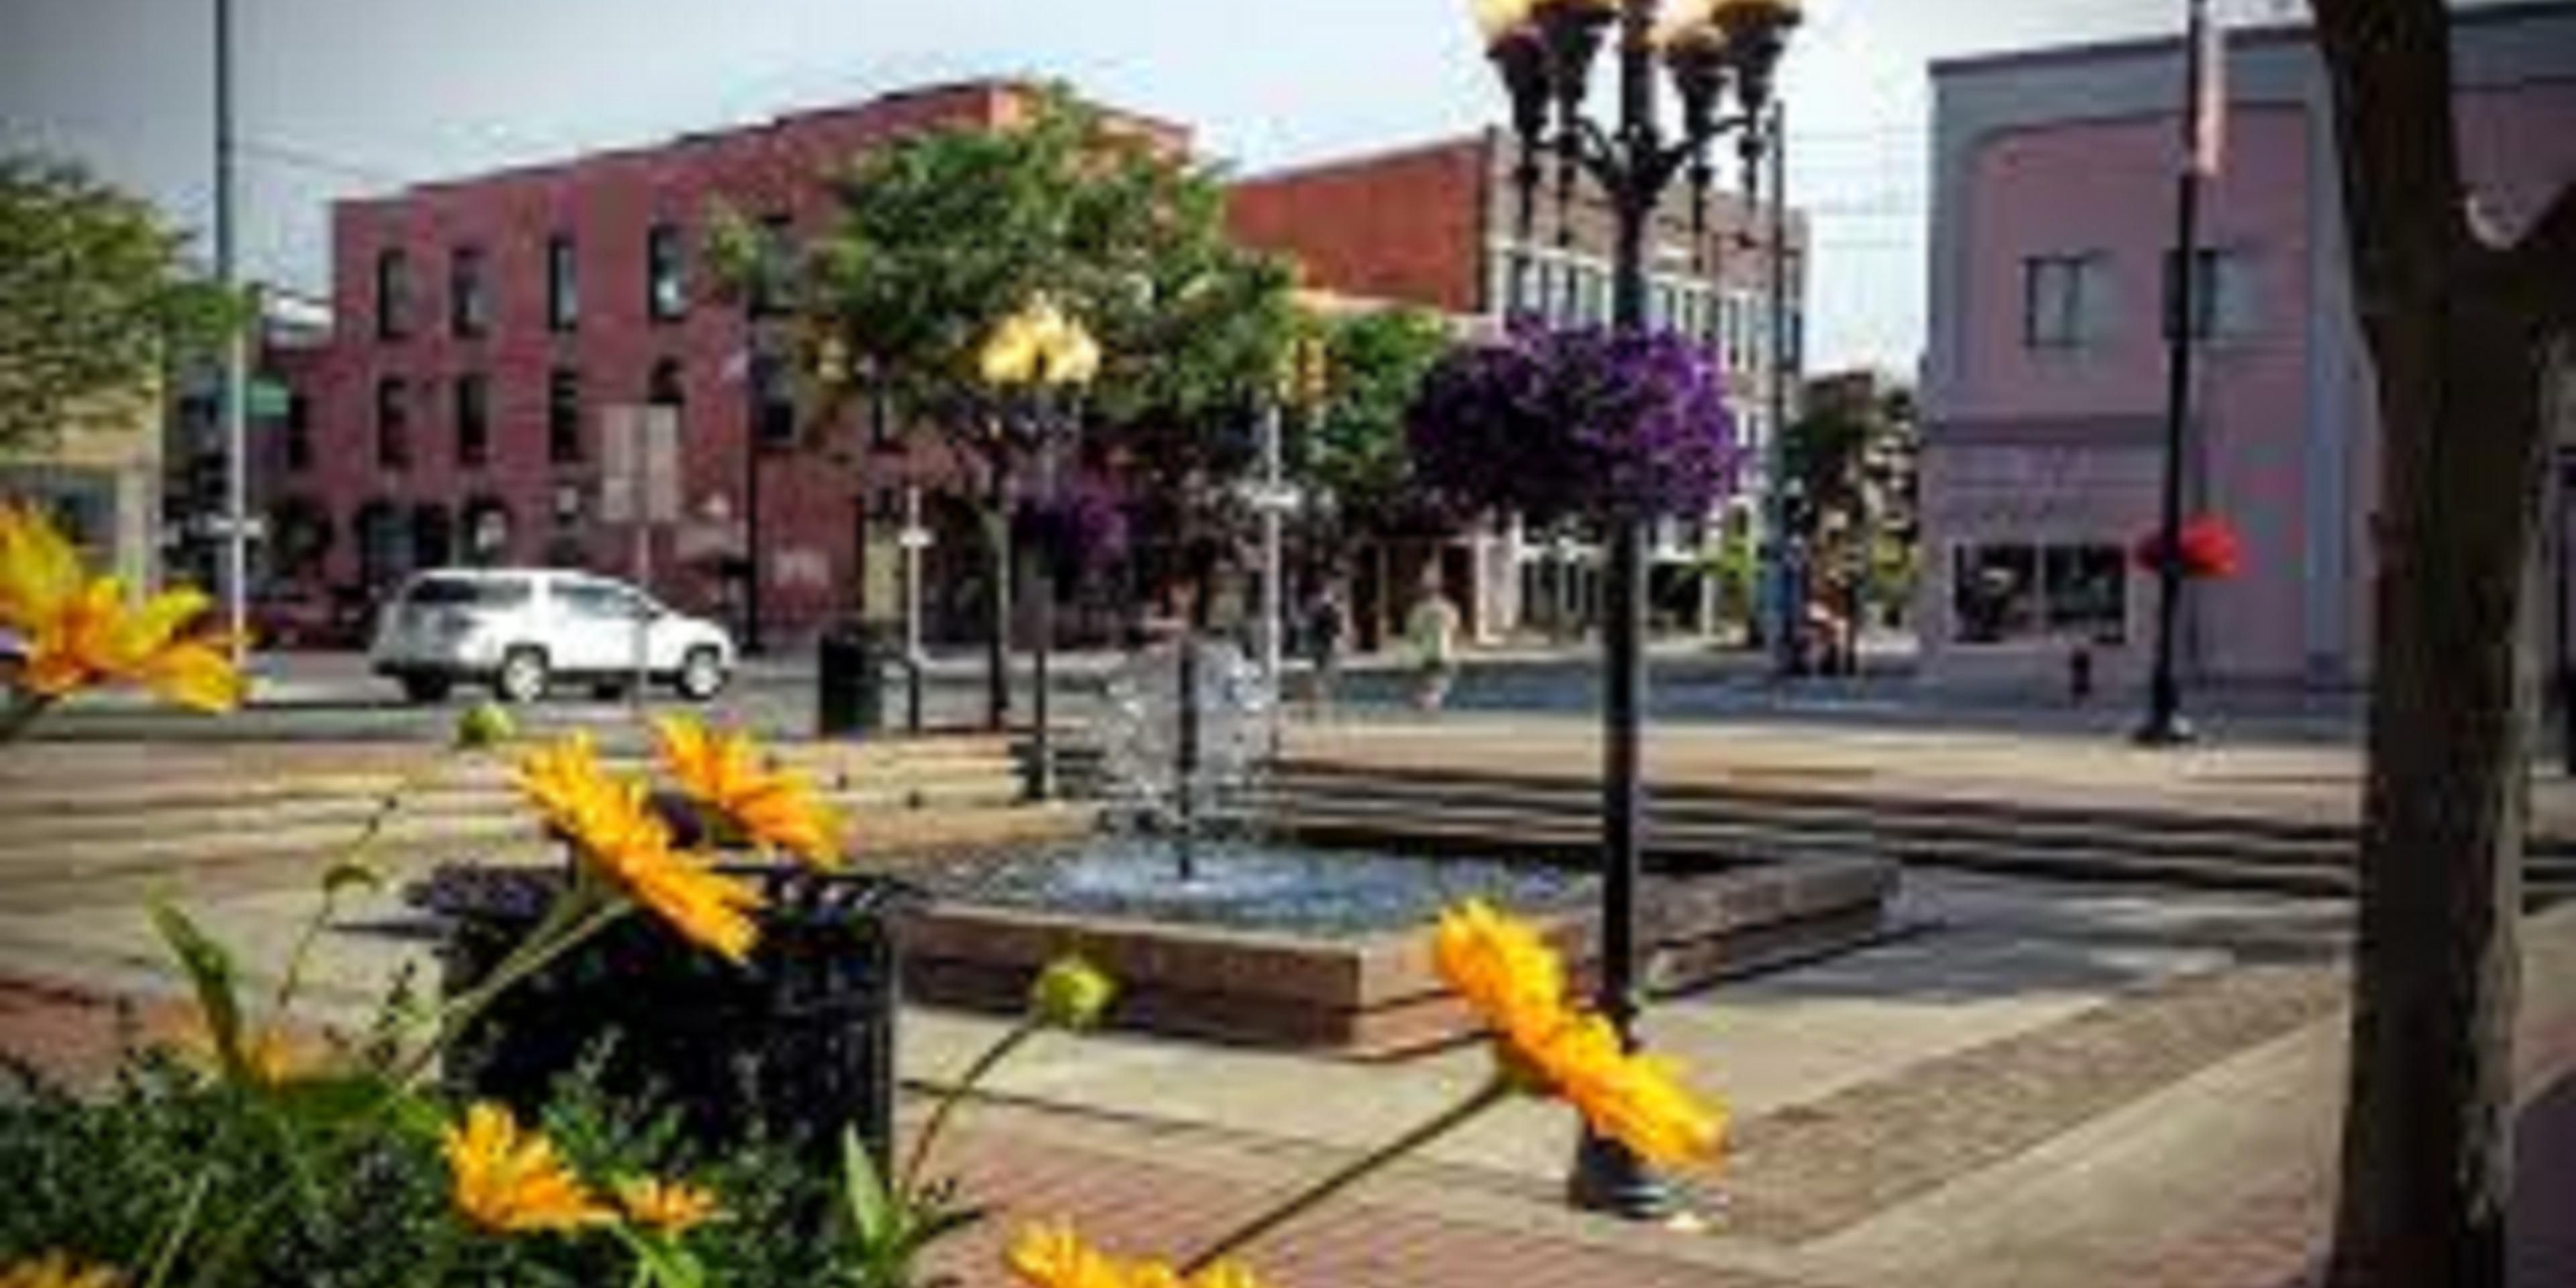 Downtown Alpena is home to over 200 businesses, including six art galleries, two live theaters, a movie theater, a winery, headquarters to the only Marine Sanctuary located on the Great Lakes, and a variety of coffee shops, restaurants, pubs, and boutique shops. The summer months bring local musicians, festivals and activities for all ages. 